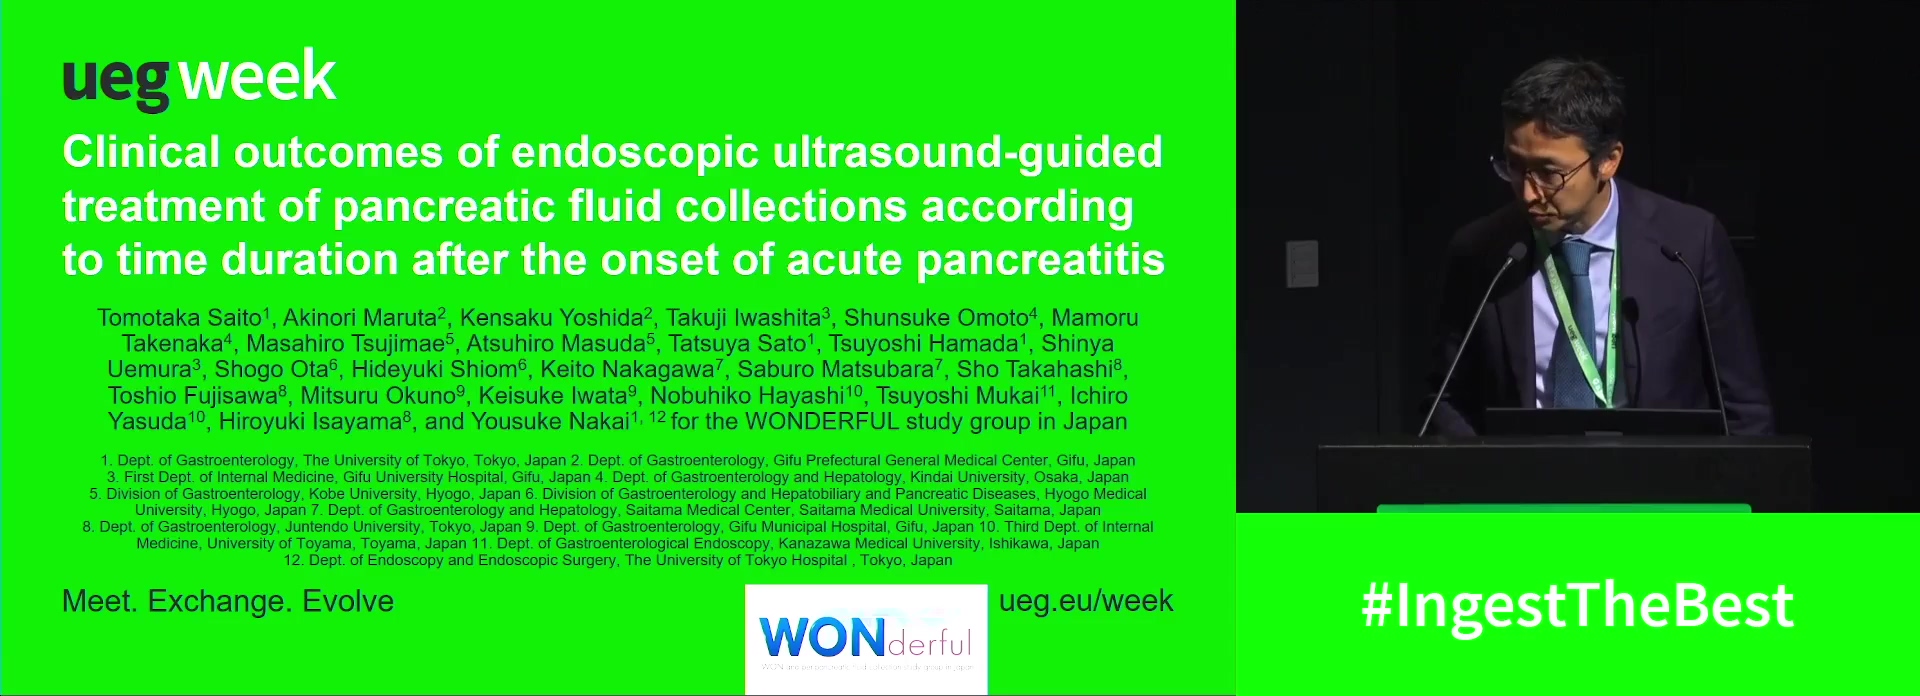 CLINICAL OUTCOMES OF ENDOSCOPIC ULTRASOUND-GUIDED TREATMENT OF PANCREATIC FLUID COLLECTIONS ACCORDING TO TIME DURATION AFTER THE ONSET OF ACUTE PANCREATITIS